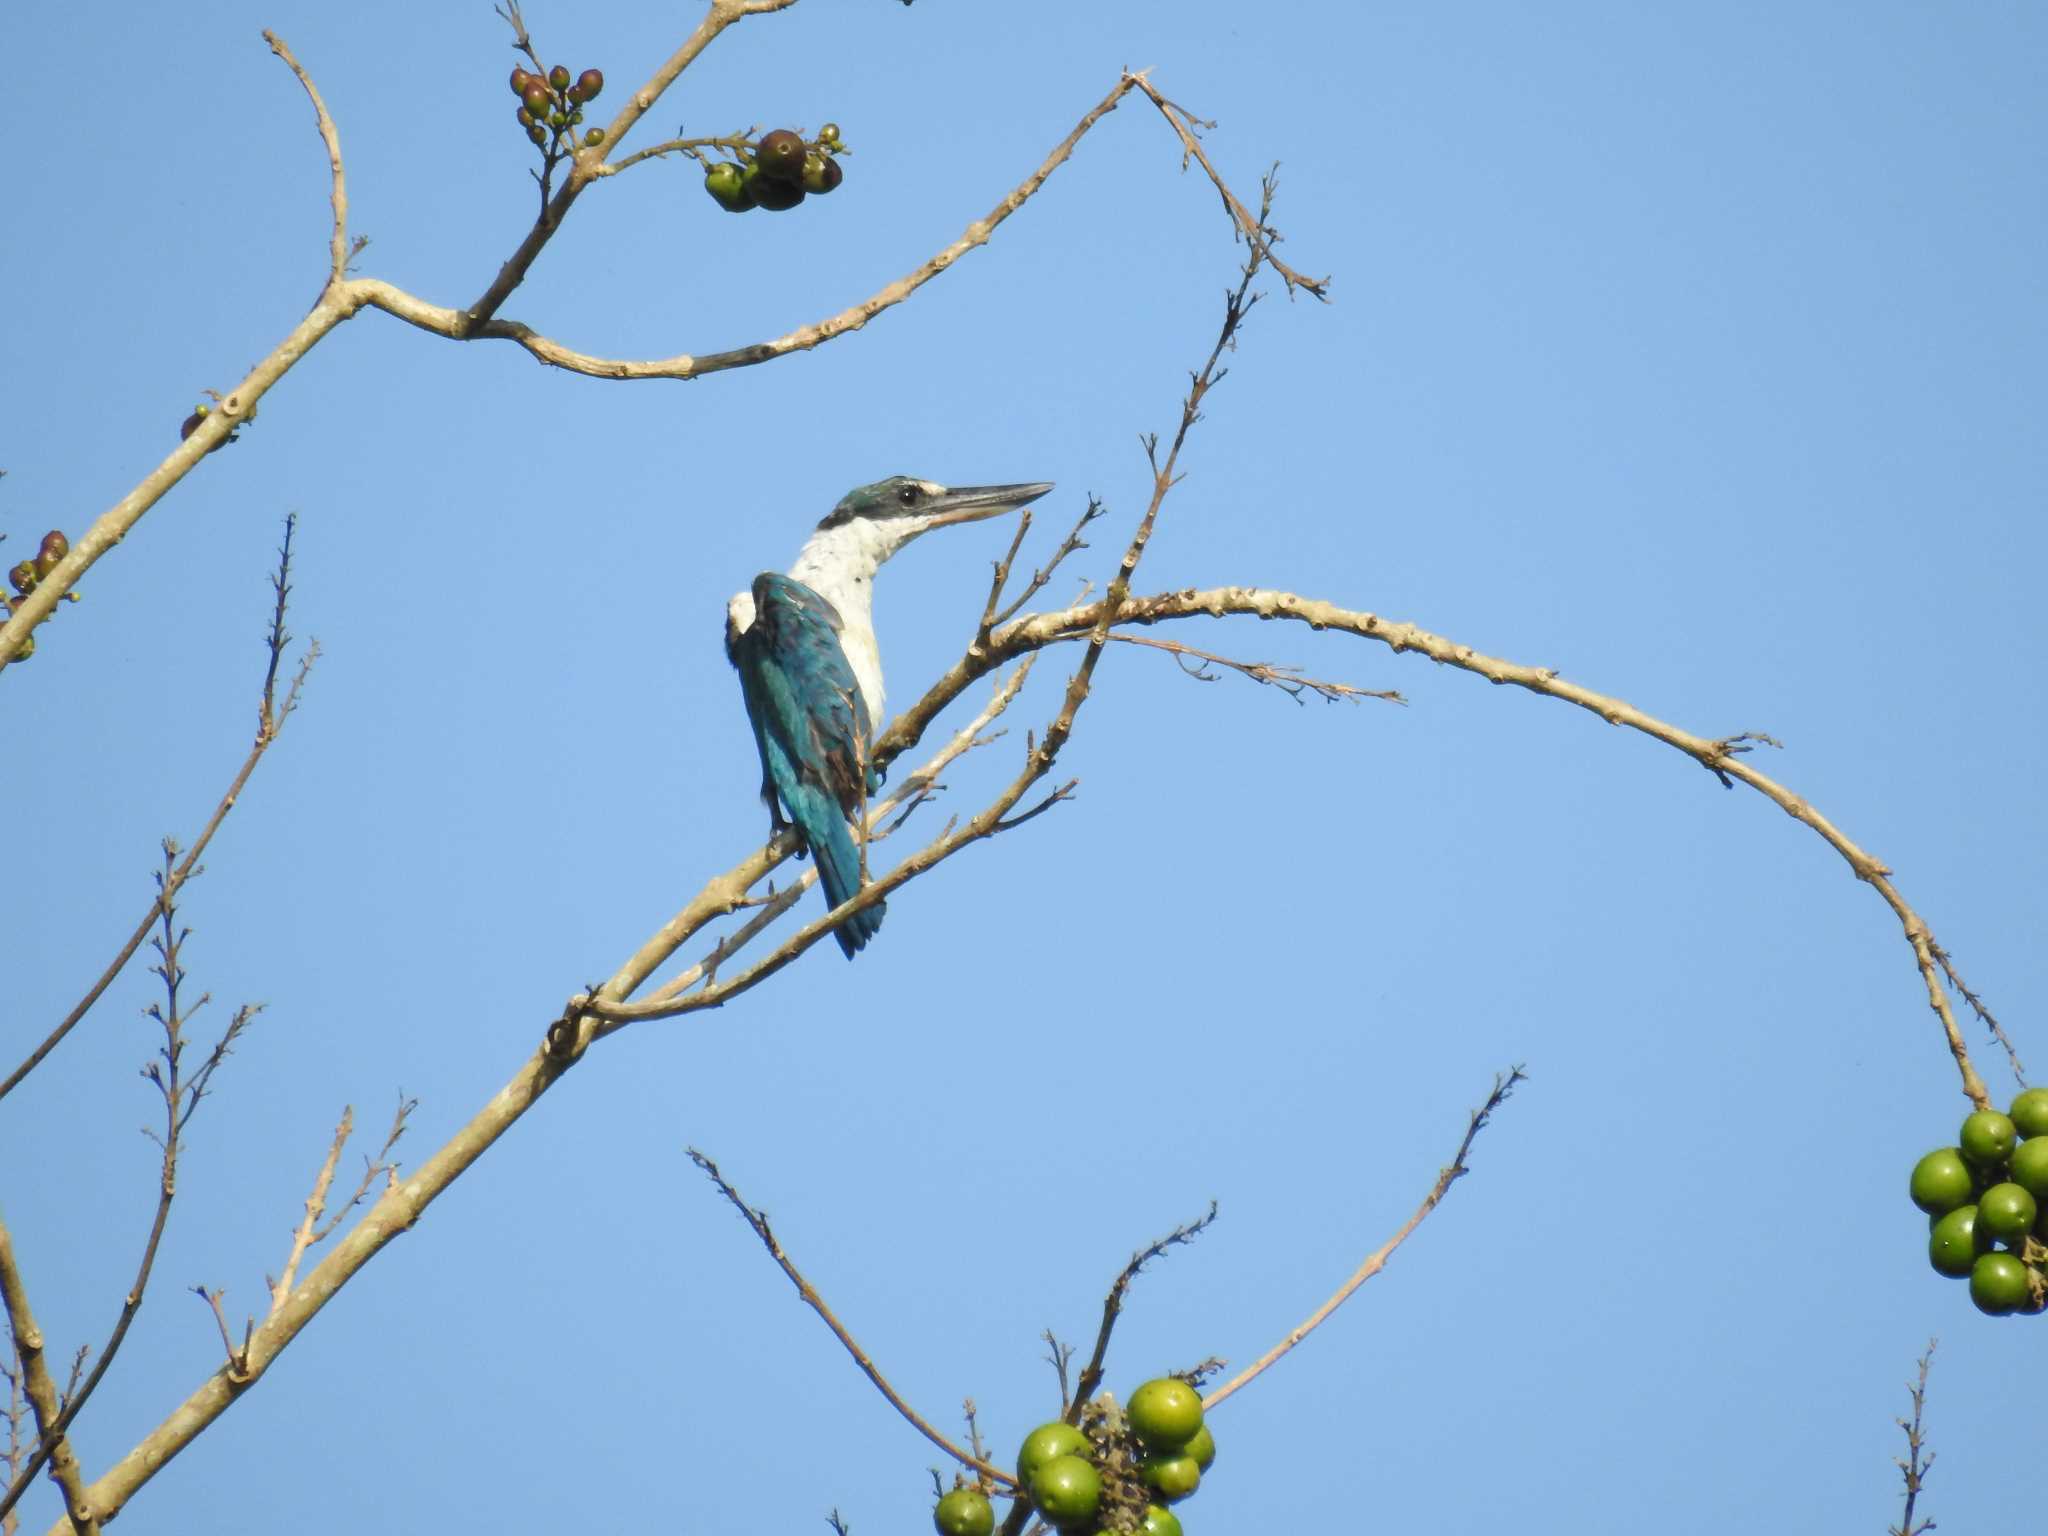 Photo of Collared Kingfisher at フィリピン　ボホール by でみこ